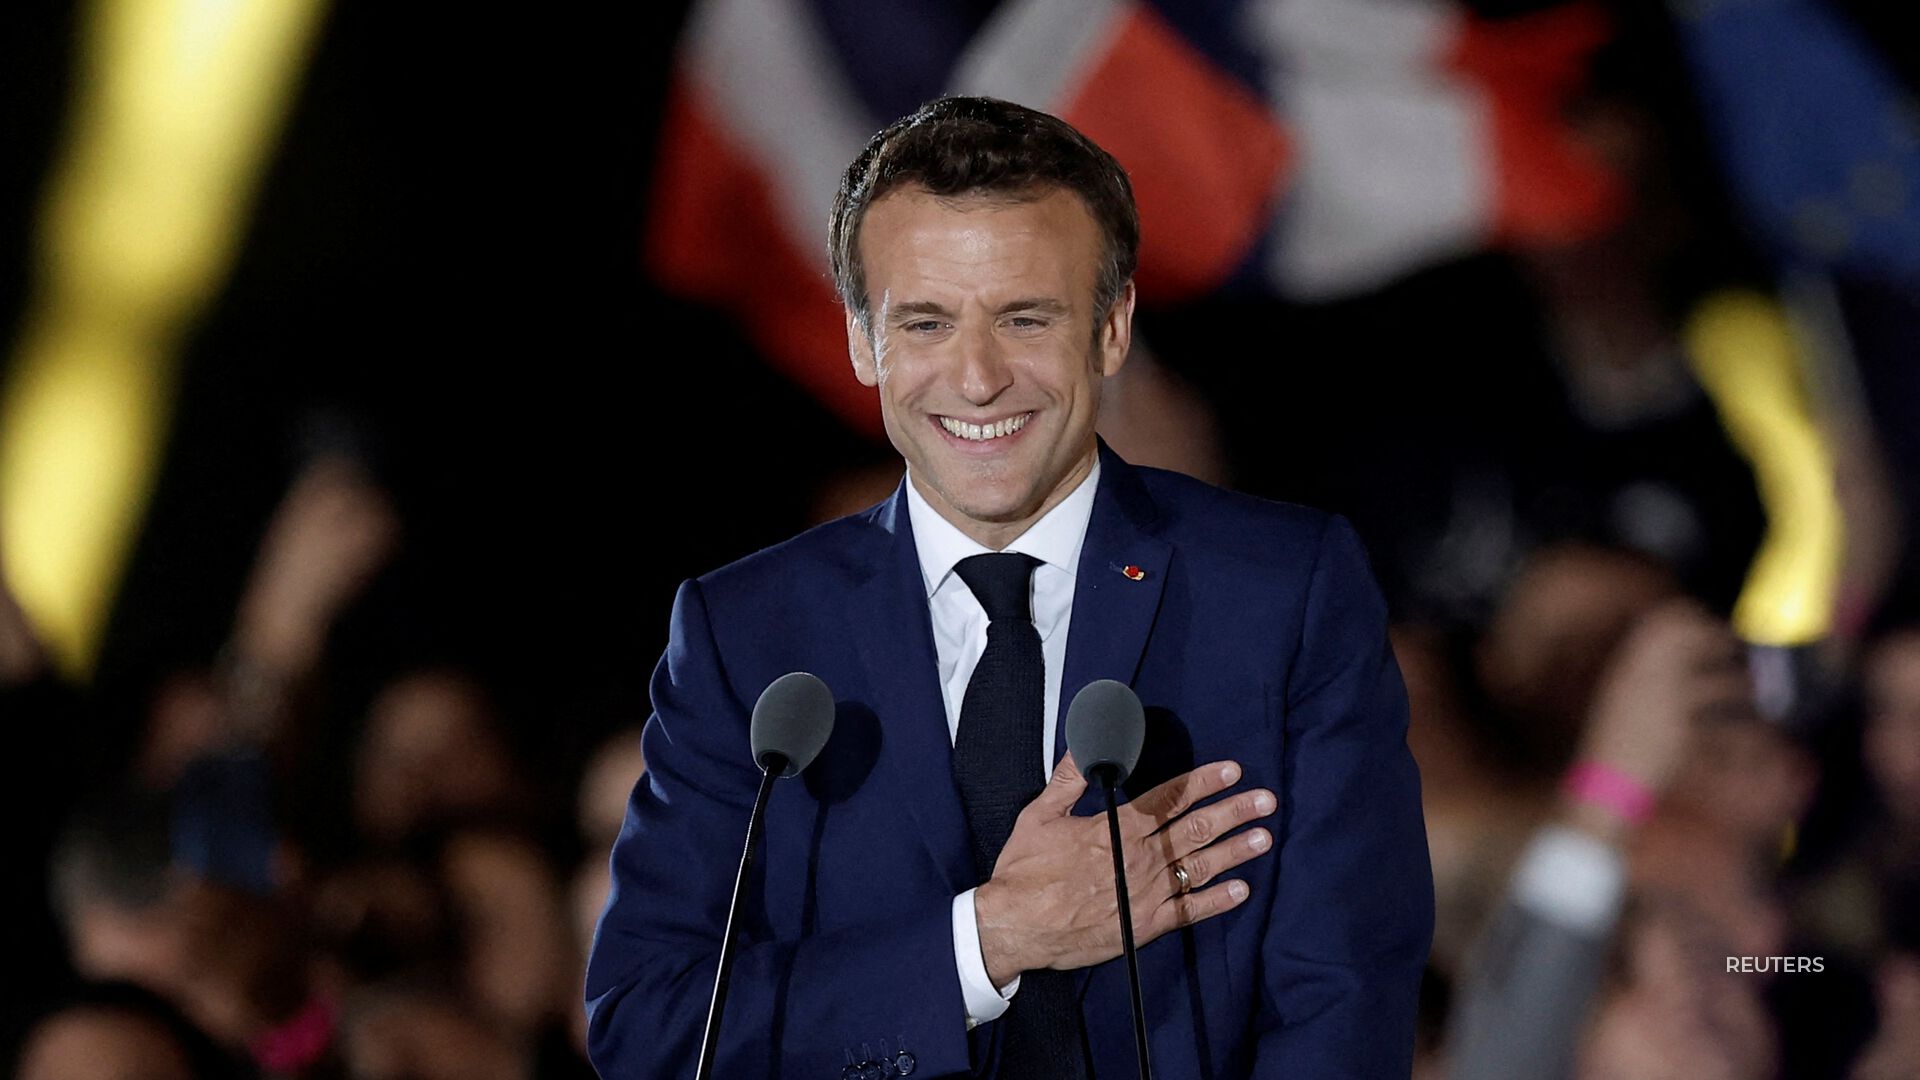 French President Emmanuel Macron was reelected for a second term, receiving 58.5% of the vote in his contest against nationalist Marine Le Pen.